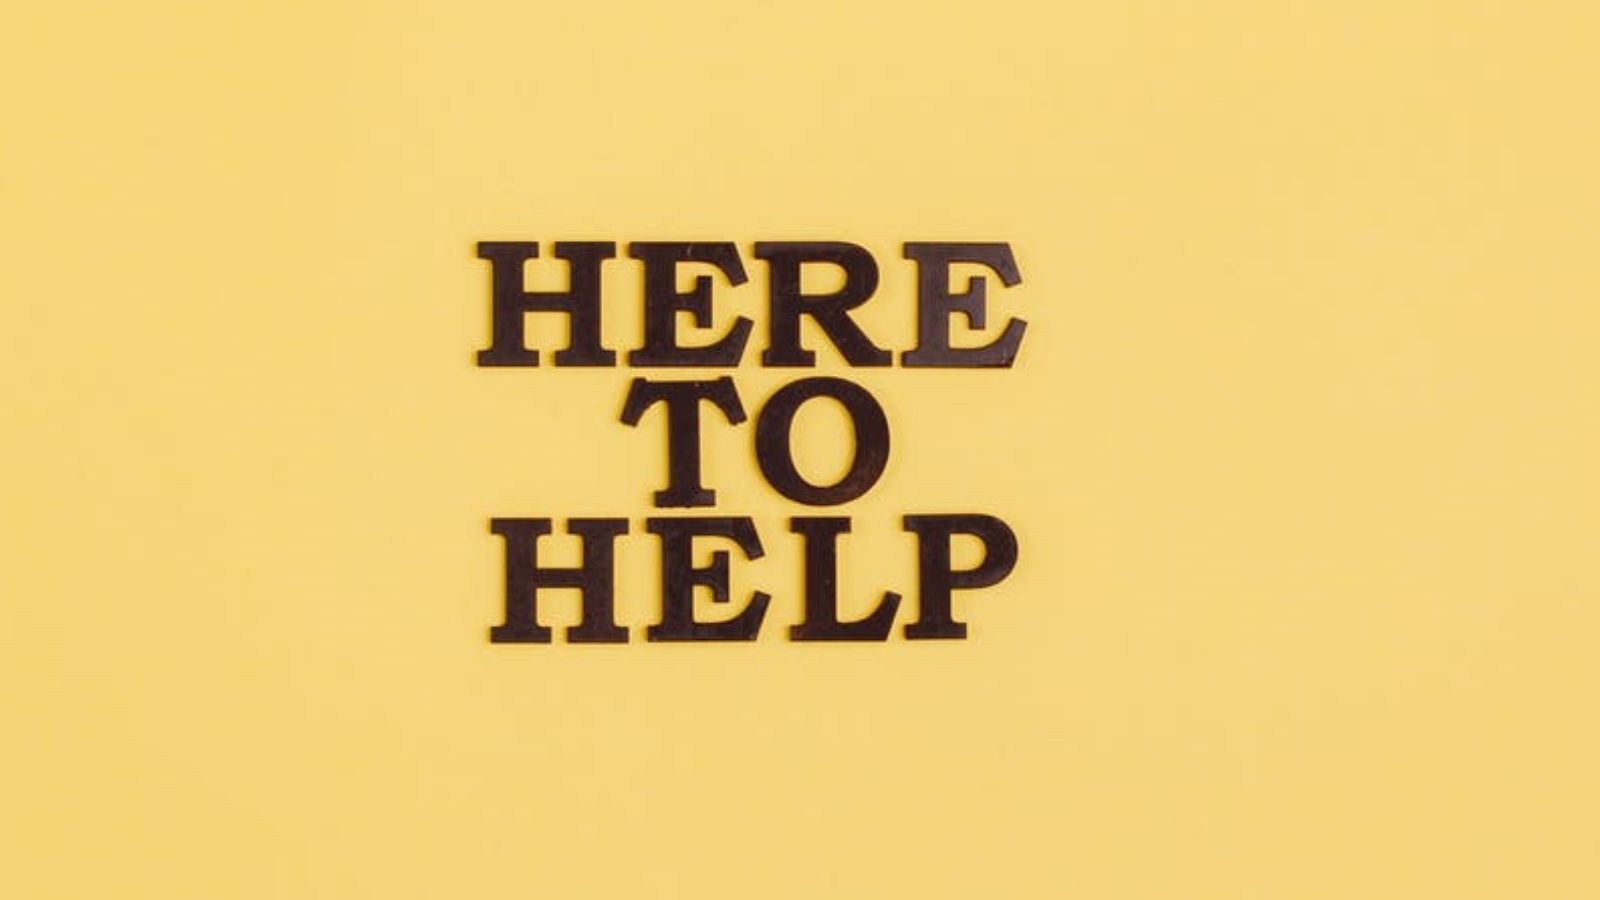 Here to help